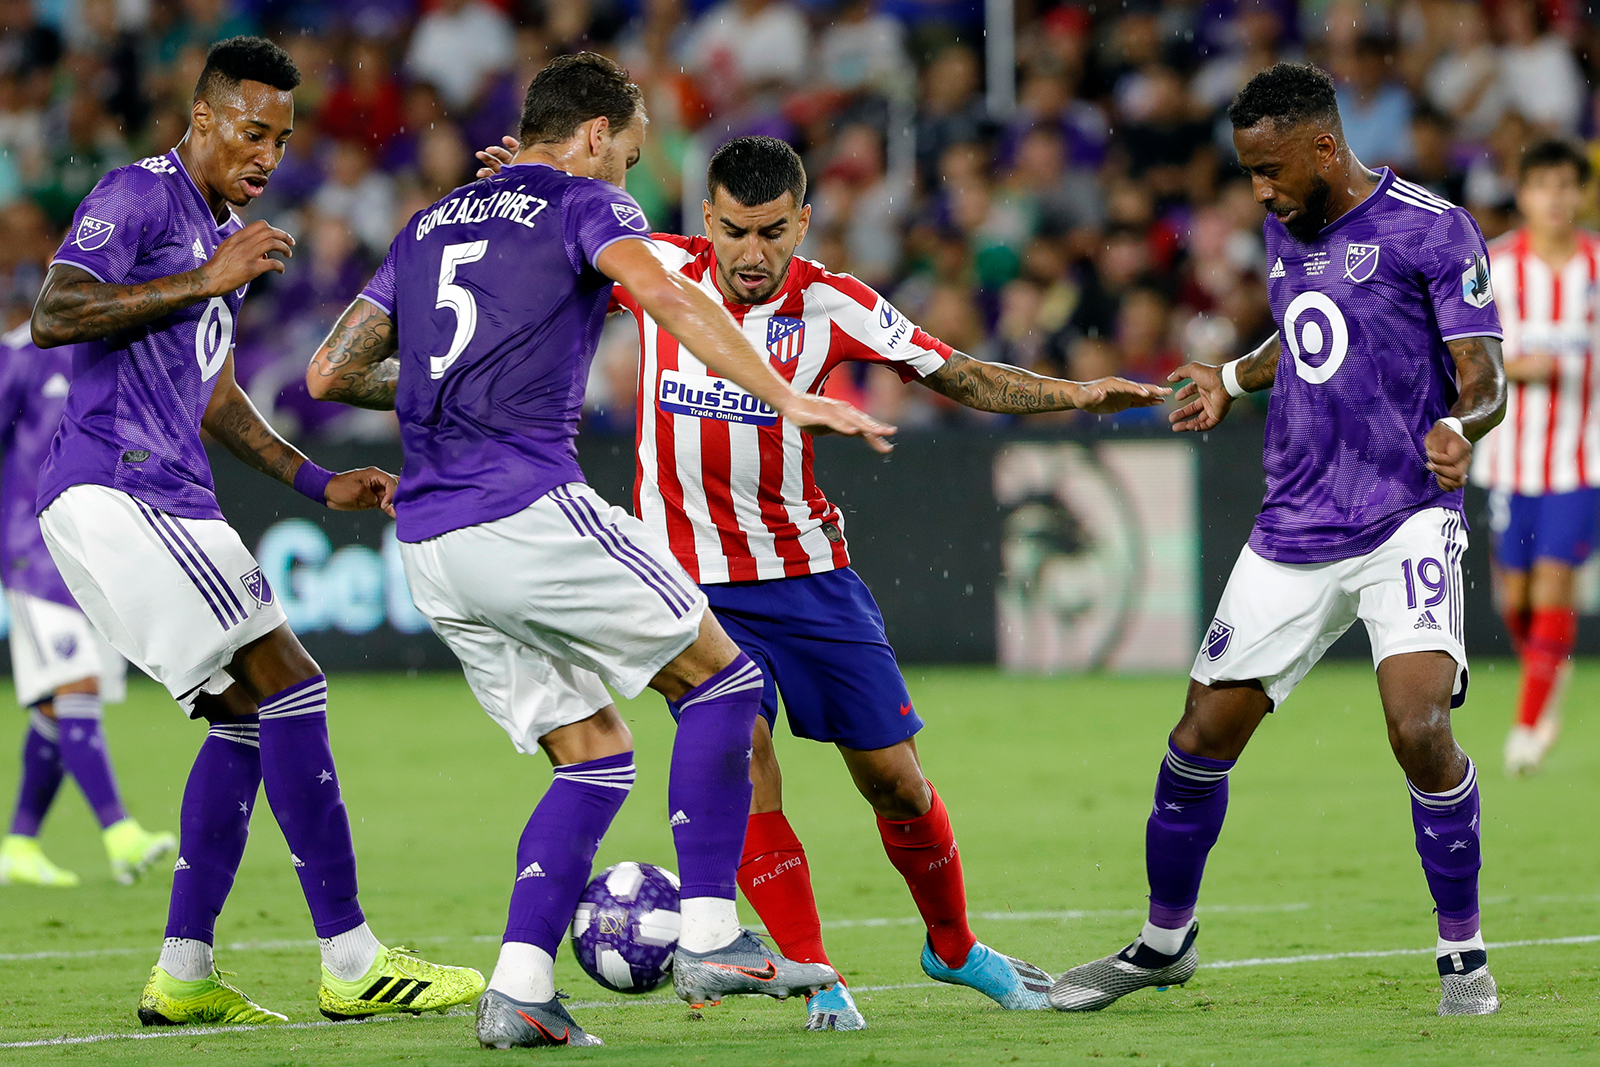 Leandro Gonzalez Pirez of MLS All-Stars and Angel Correa of Atletico de Madrid battle for the ball during the 2019 MLS All-Star Game between MLS All Stars and Atletico de Madrid at Exploria Stadium in Orlando, Florida on July 31, 2019.